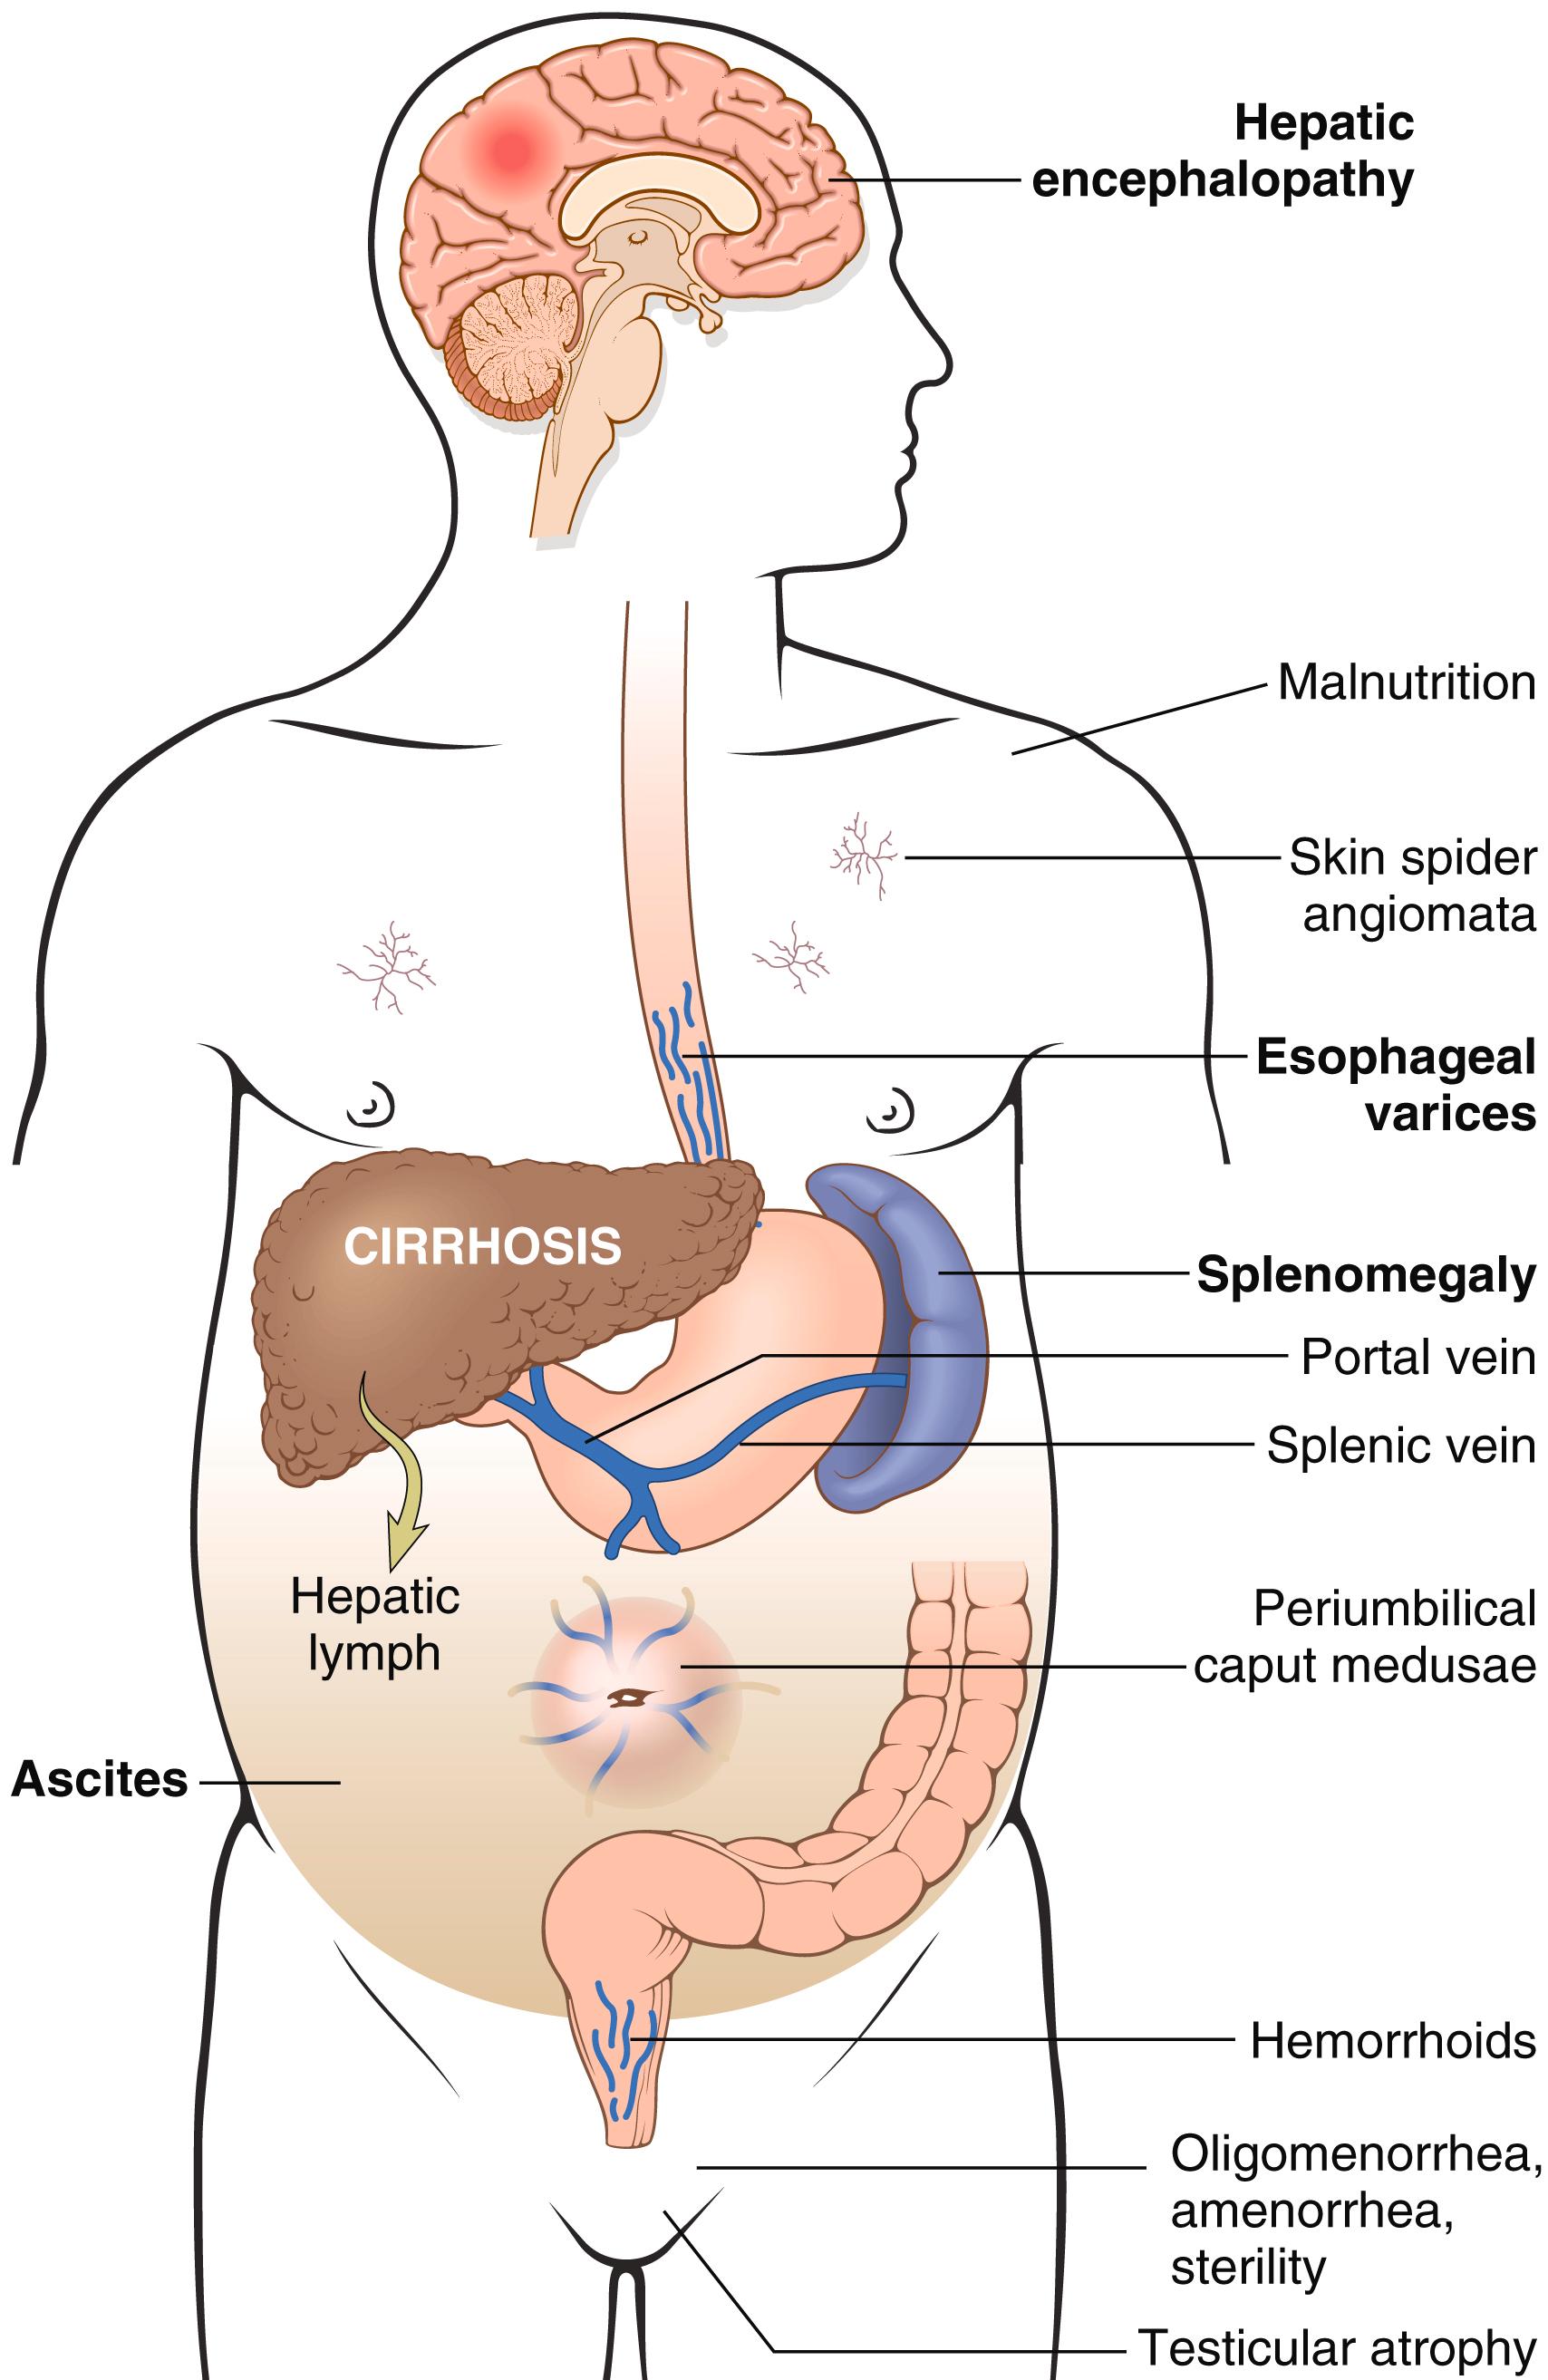 FIG. 14.7, Major clinical consequences of portal hypertension in the setting of cirrhosis.